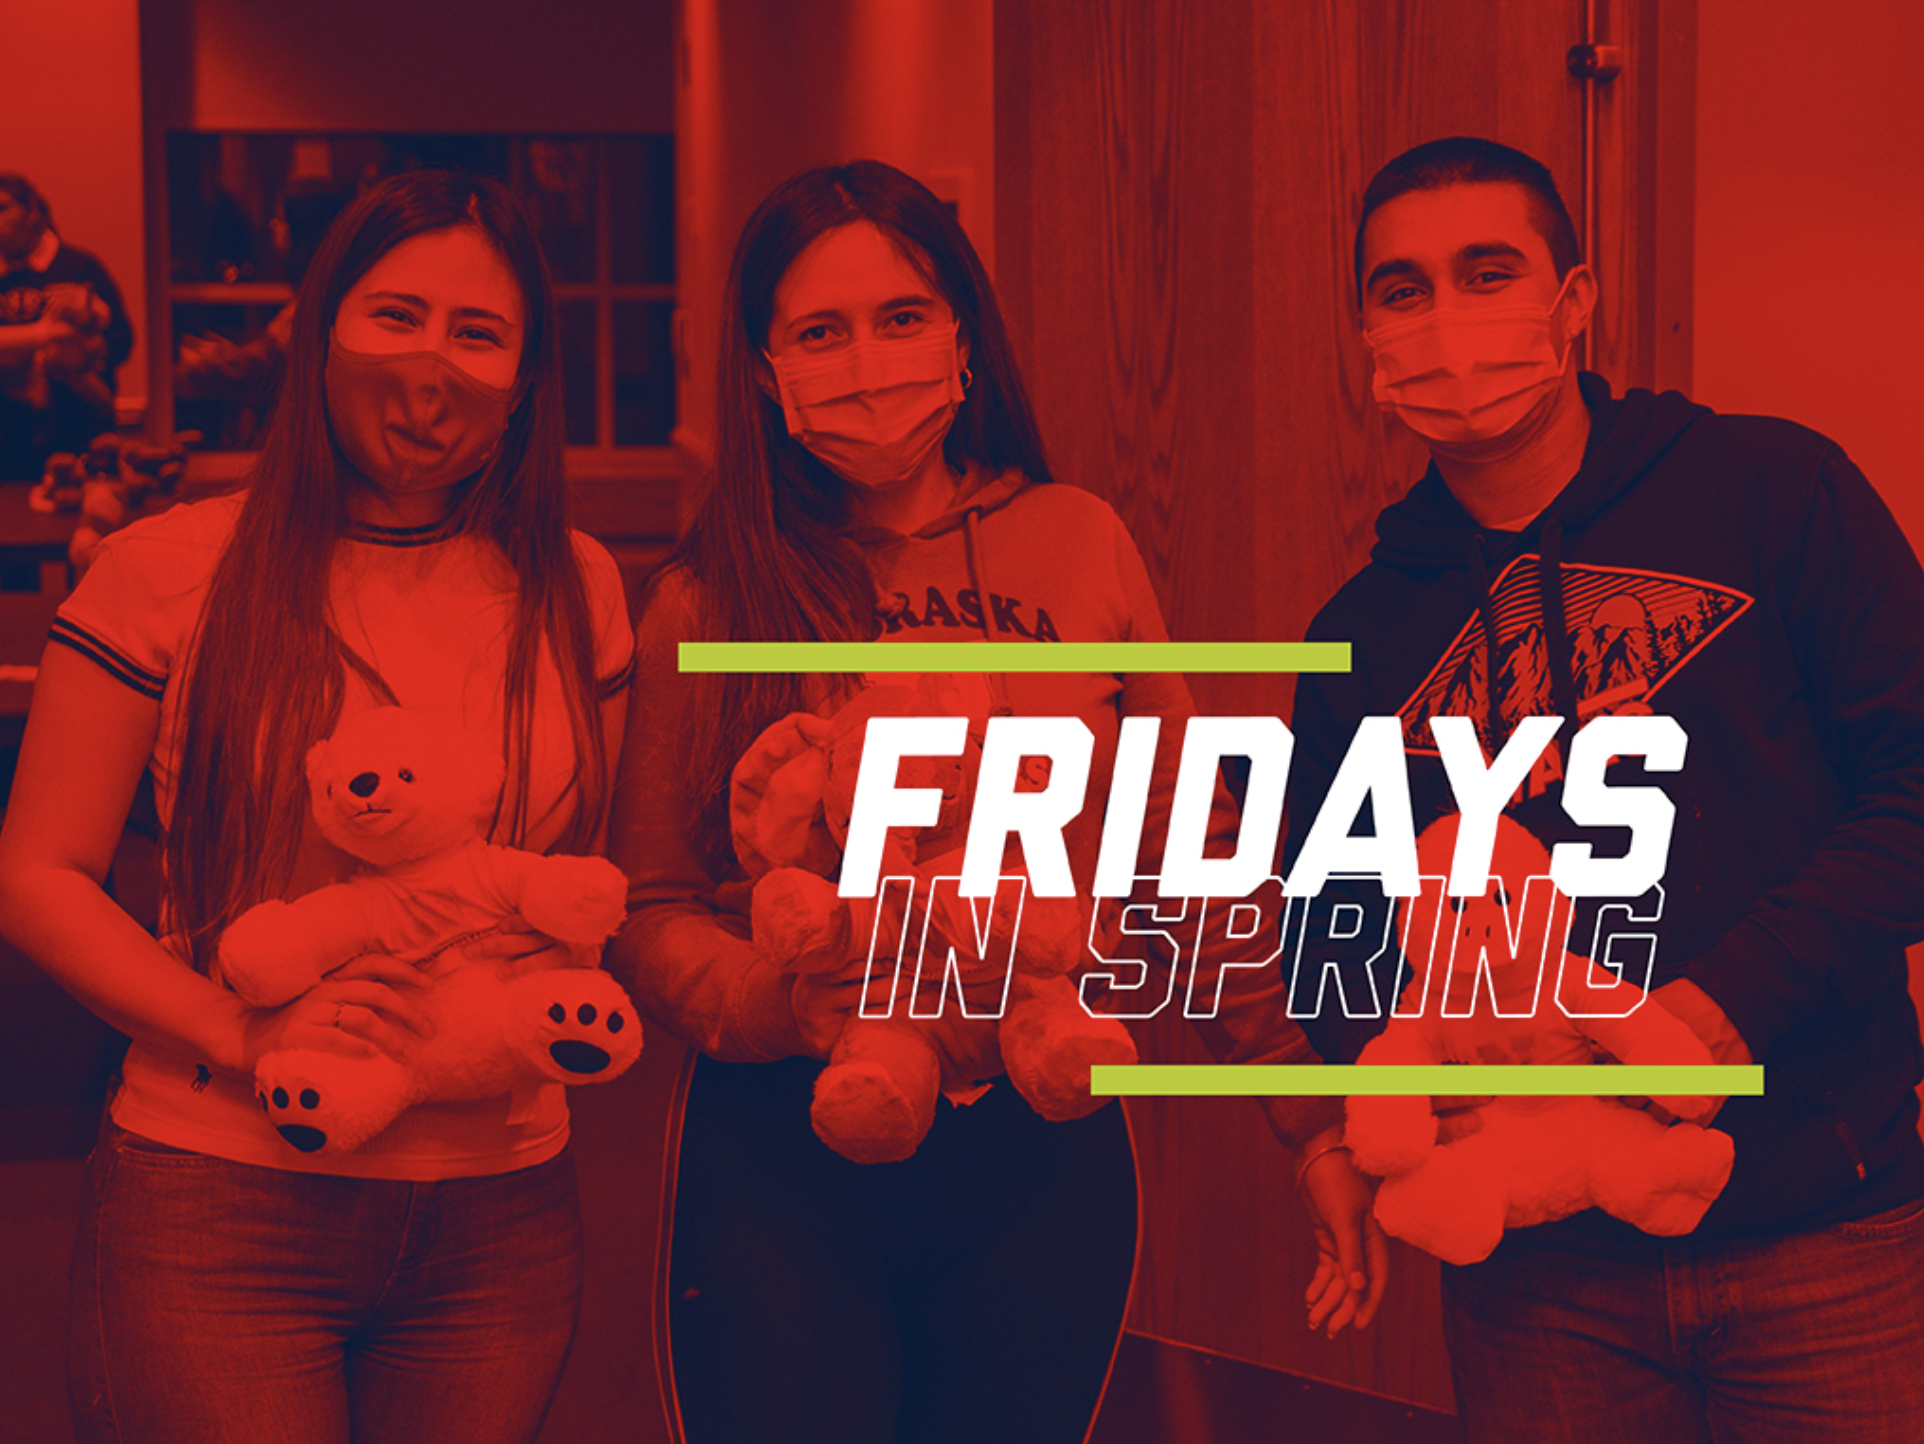 Check out our list of the best free(ish) events coming up each Friday this semester.